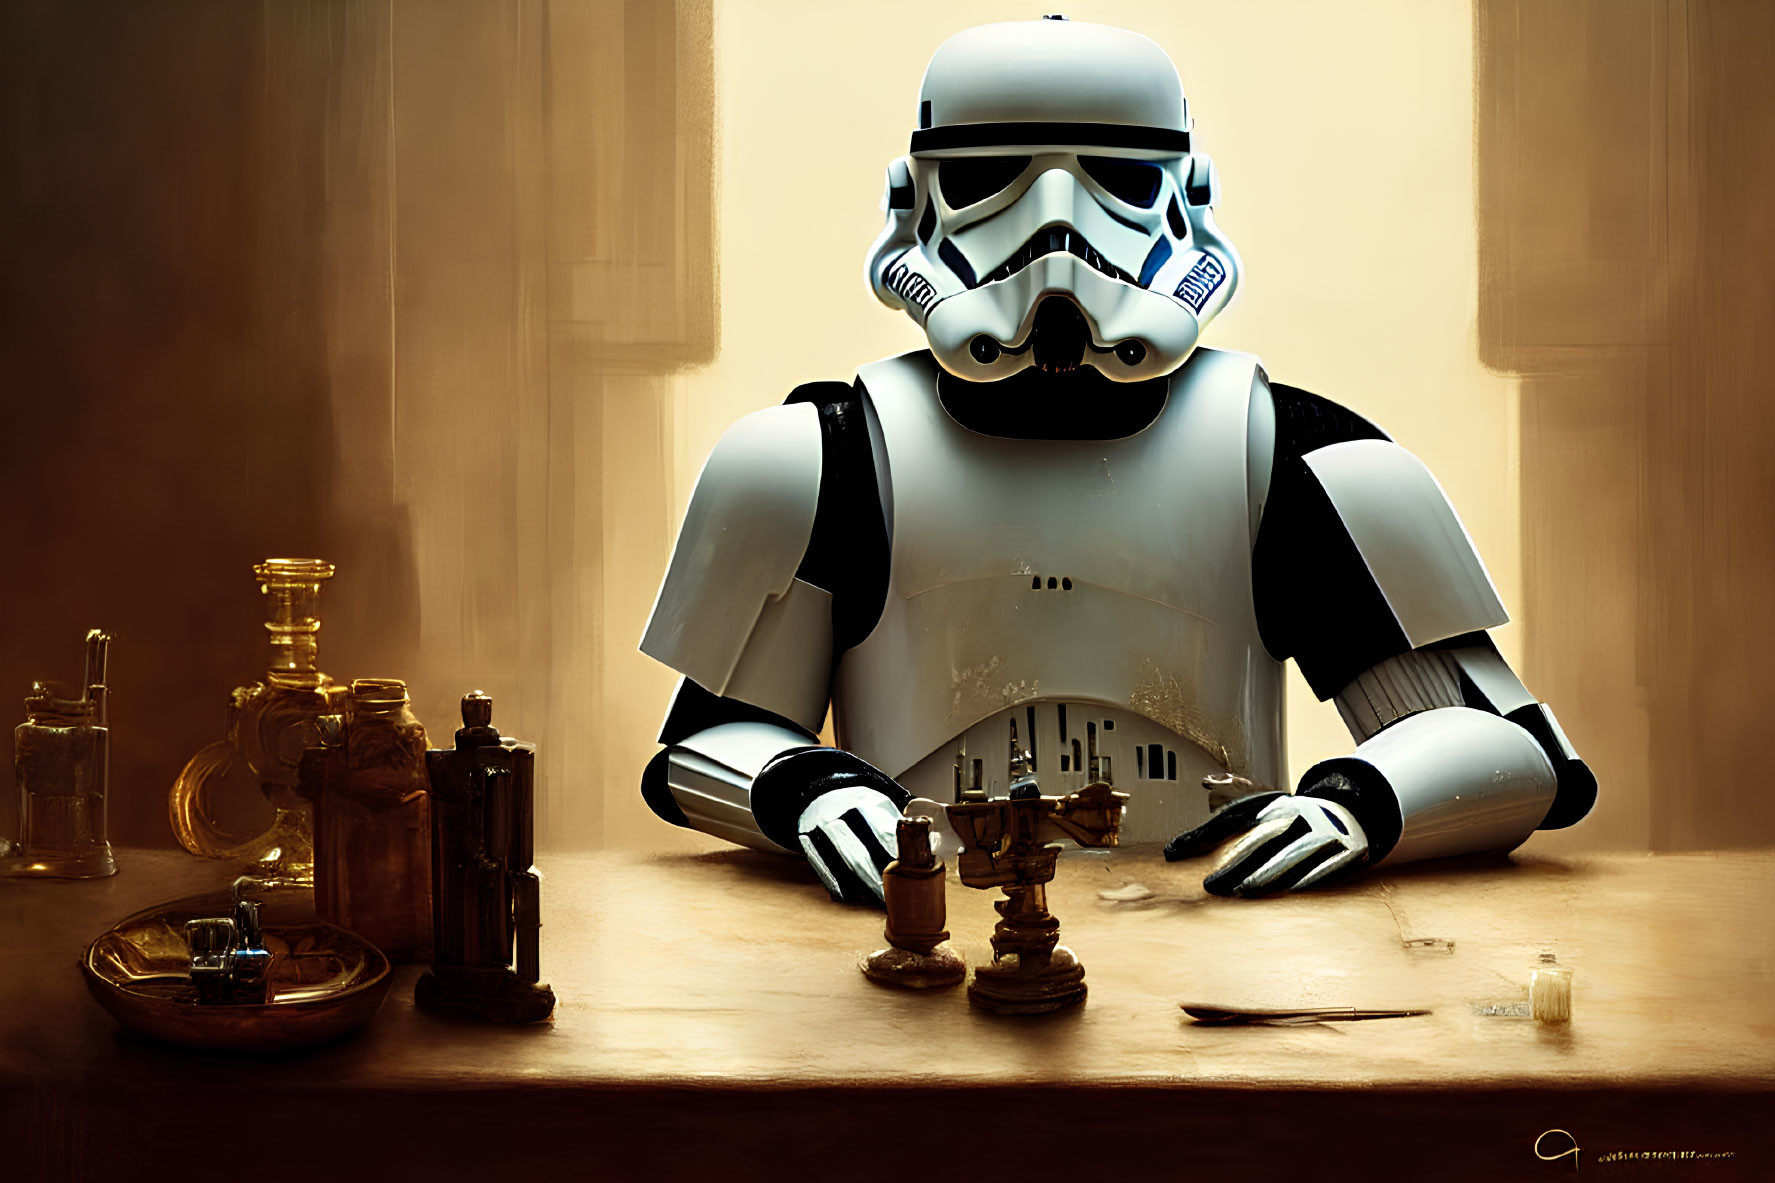 Stormtrooper in costume playing chess surrounded by antique glass bottles in dimly lit room